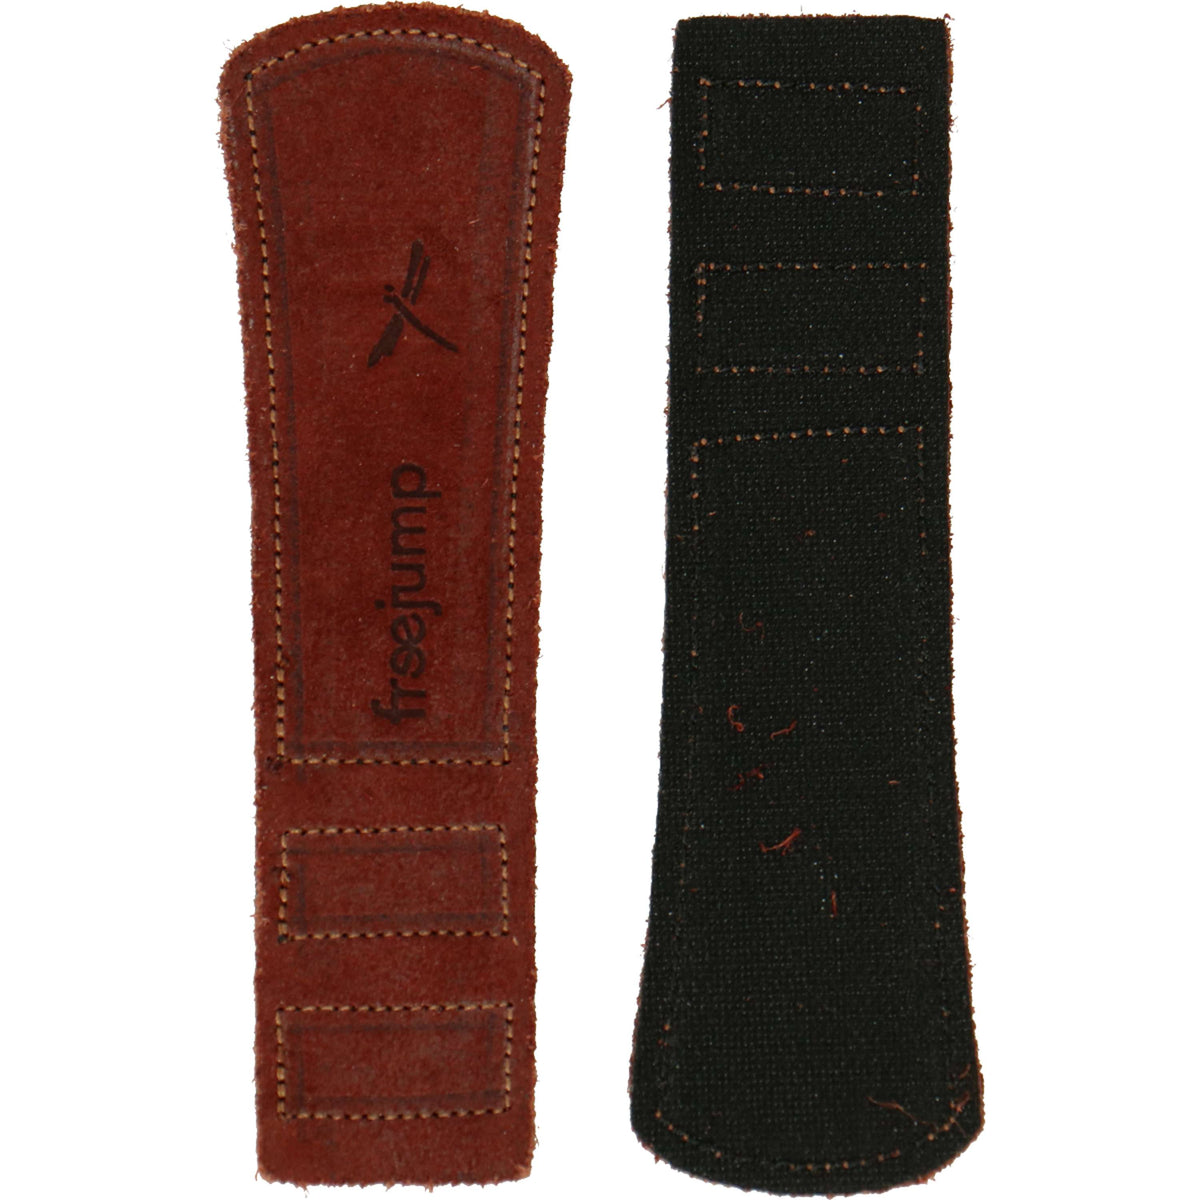 Freejump Pad Strap Pro Grip Leather Brown